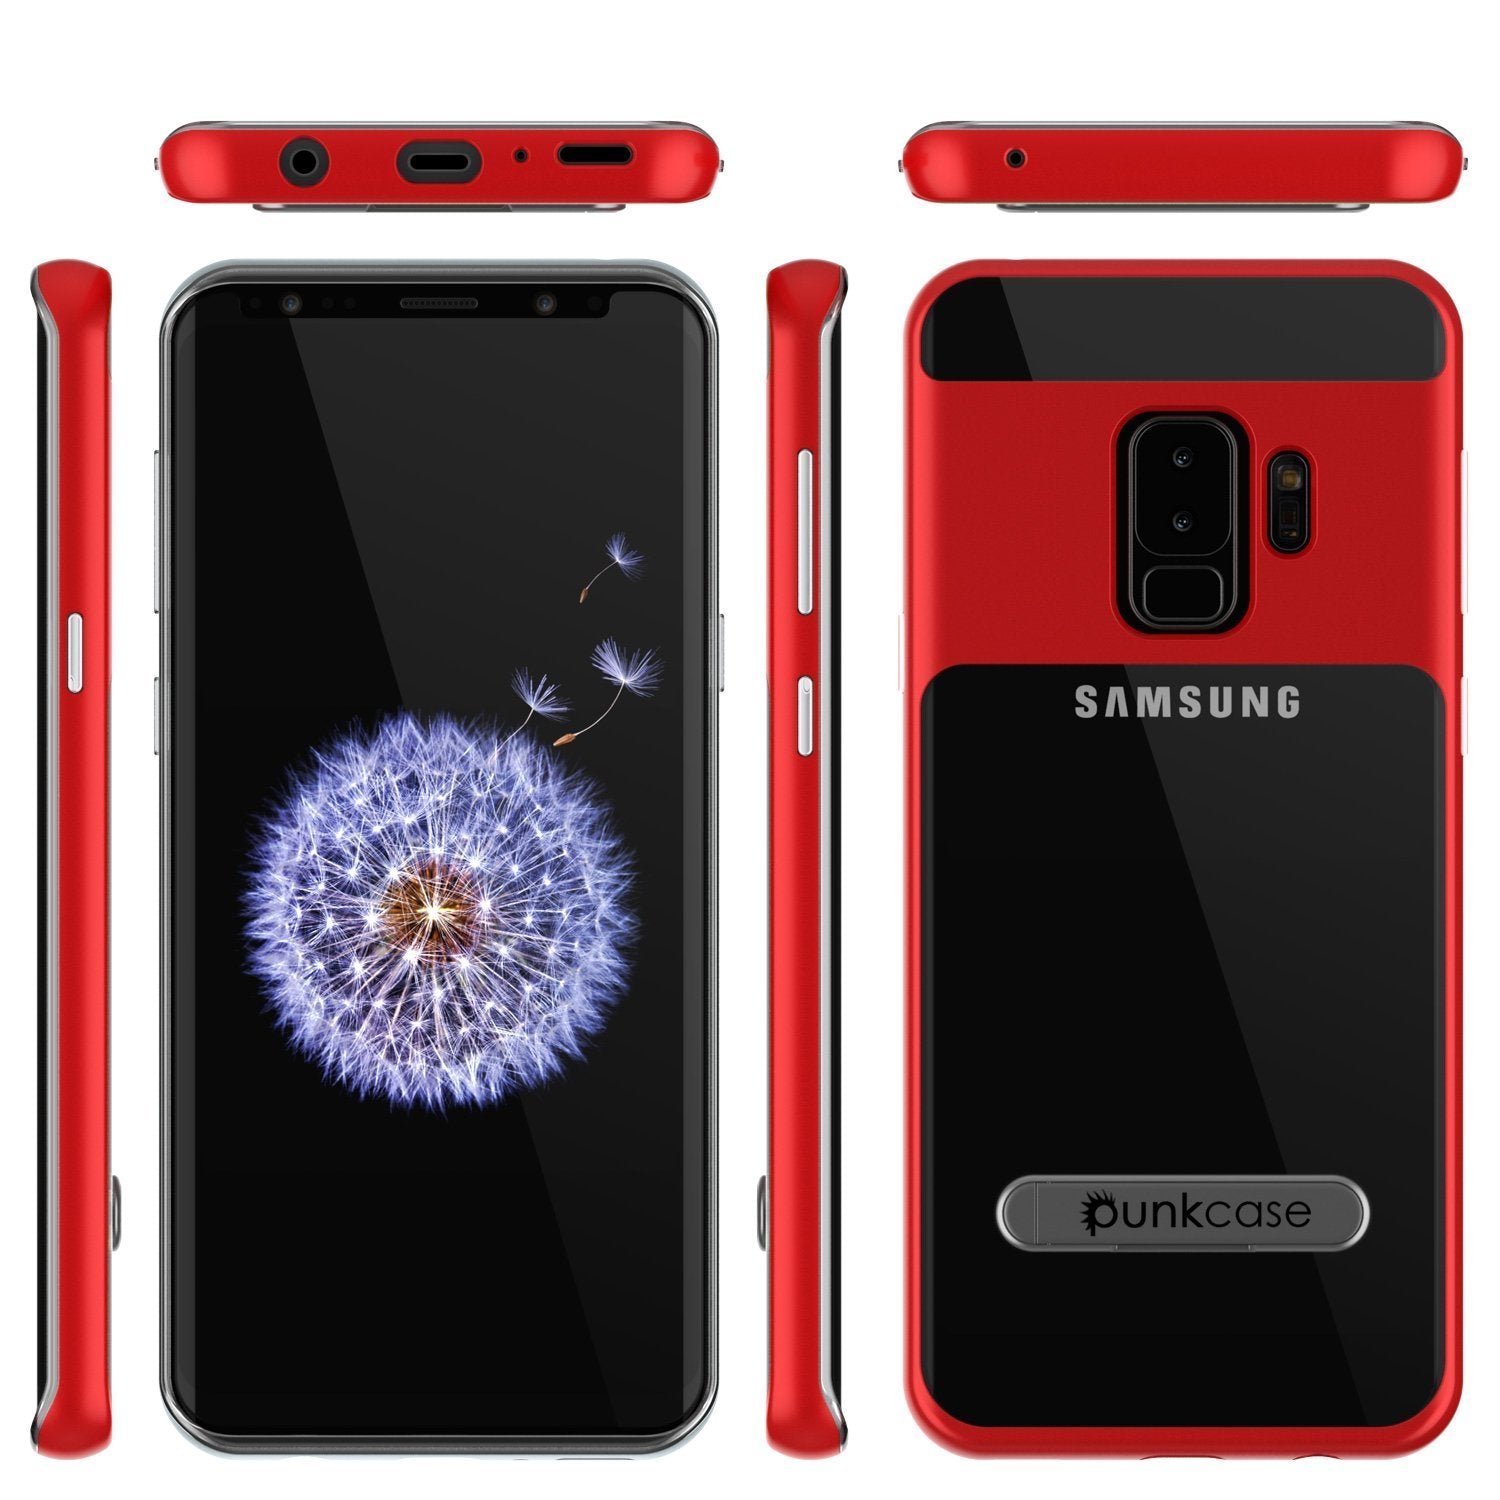 Galaxy S9+ Plus Case, PUNKcase [LUCID 3.0 Series] [Slim Fit] [Clear Back] Armor Cover w/ Integrated Kickstand, Anti-Shock System & PUNKSHIELD Screen Protector for Samsung Galaxy S9+ Plus [Red]